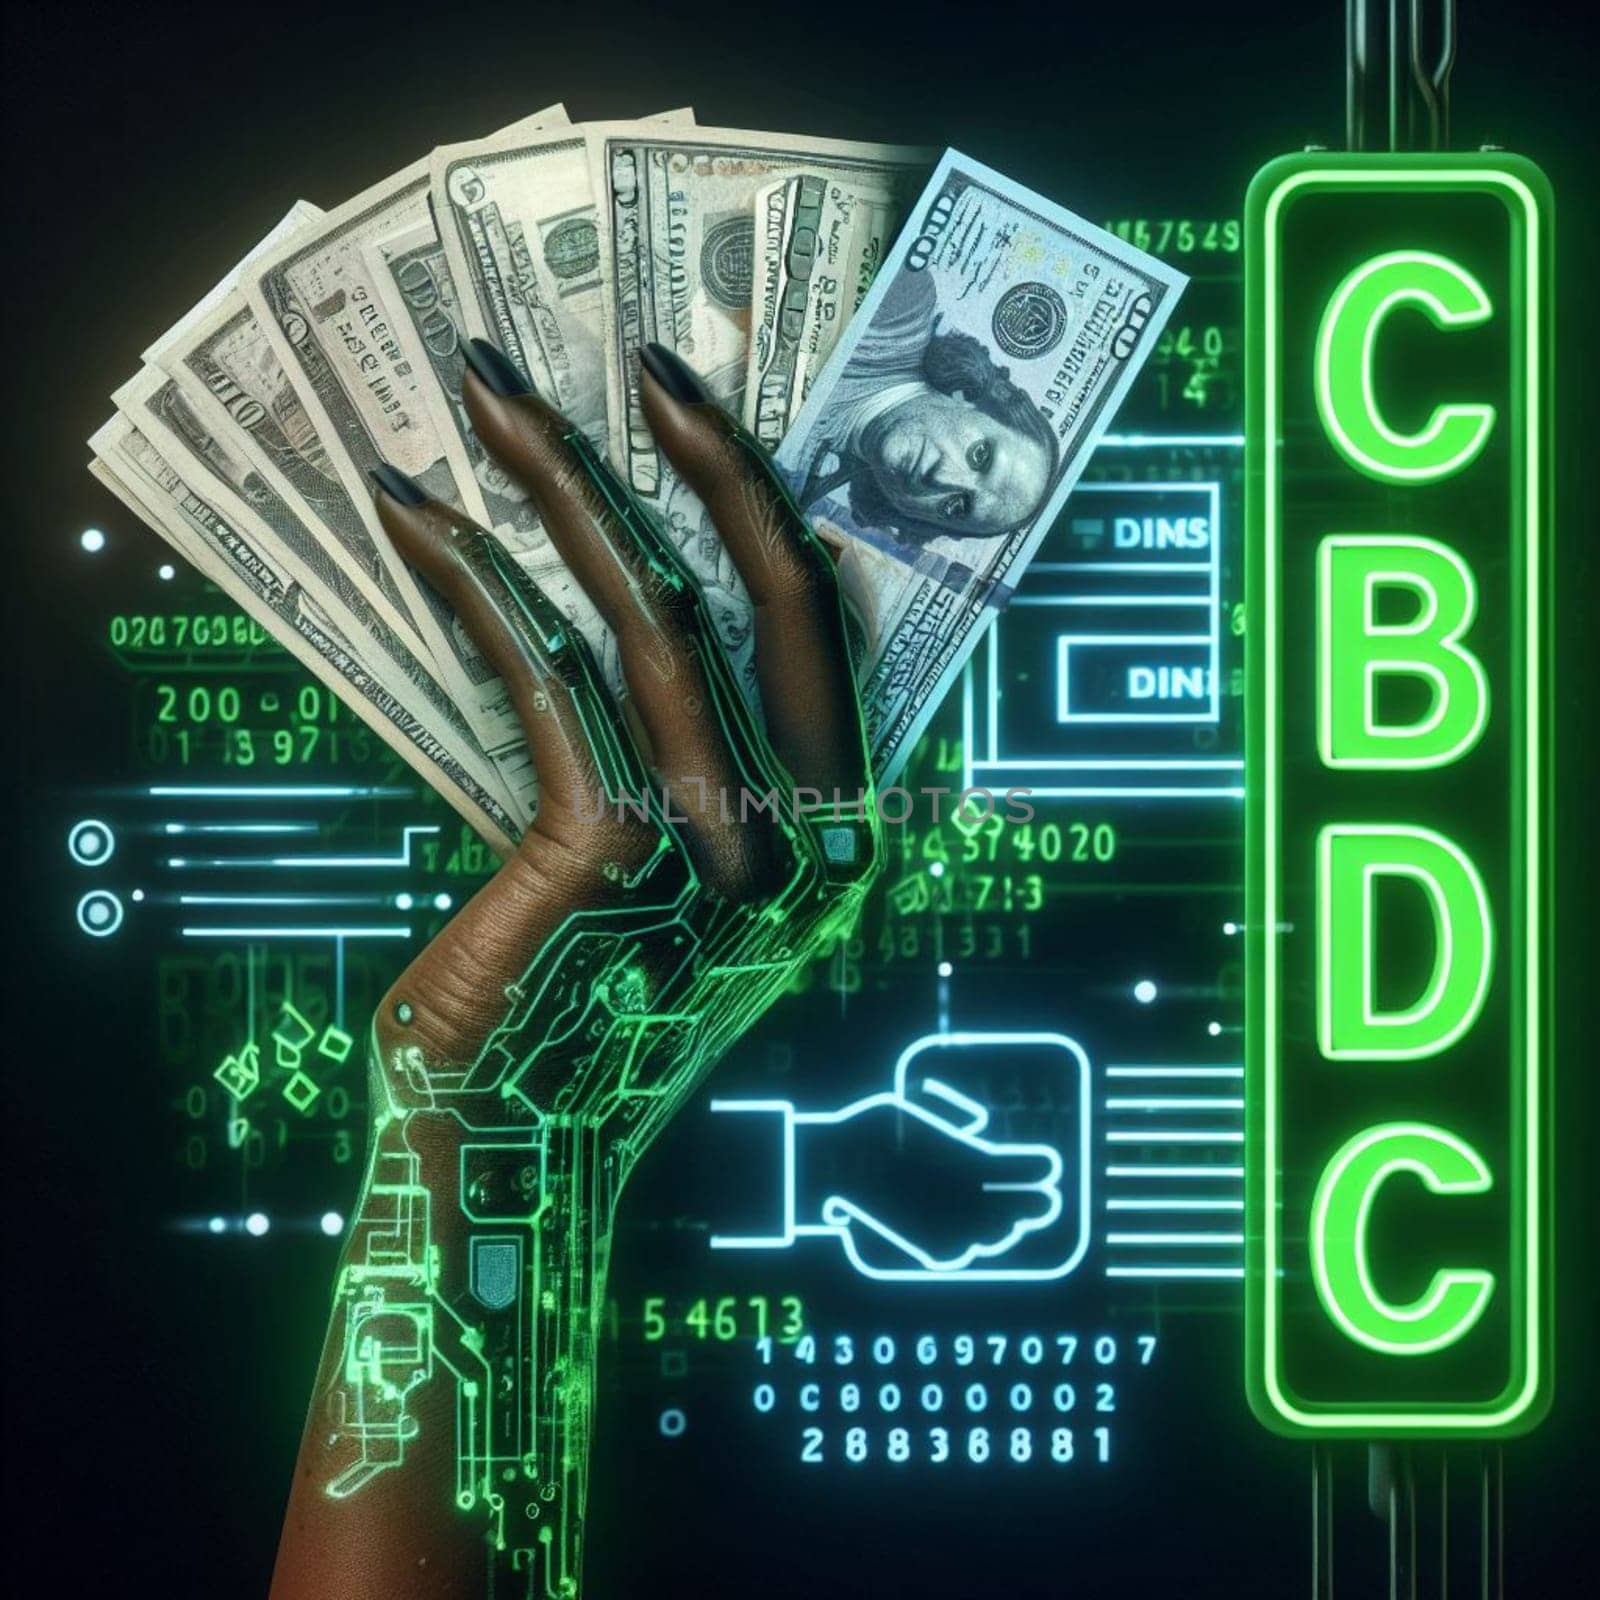 central bank digital currency and crypto signs graphic virtual money concept ai generative art